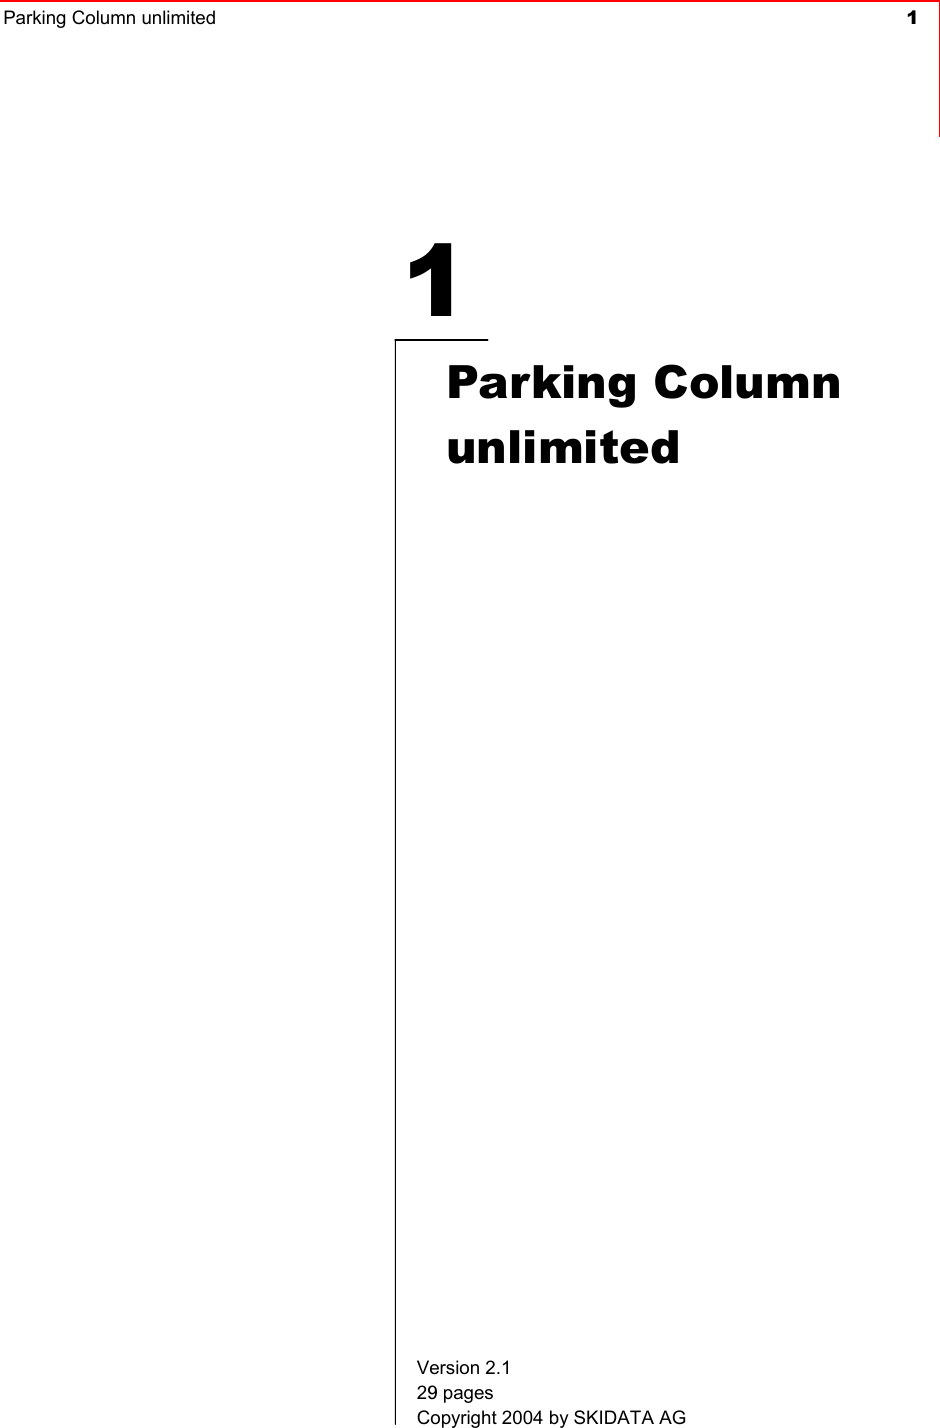 Parking Column unlimited  11Parking Column unlimitedVersion 2.1 29 pages Copyright 2004 by SKIDATA AG 